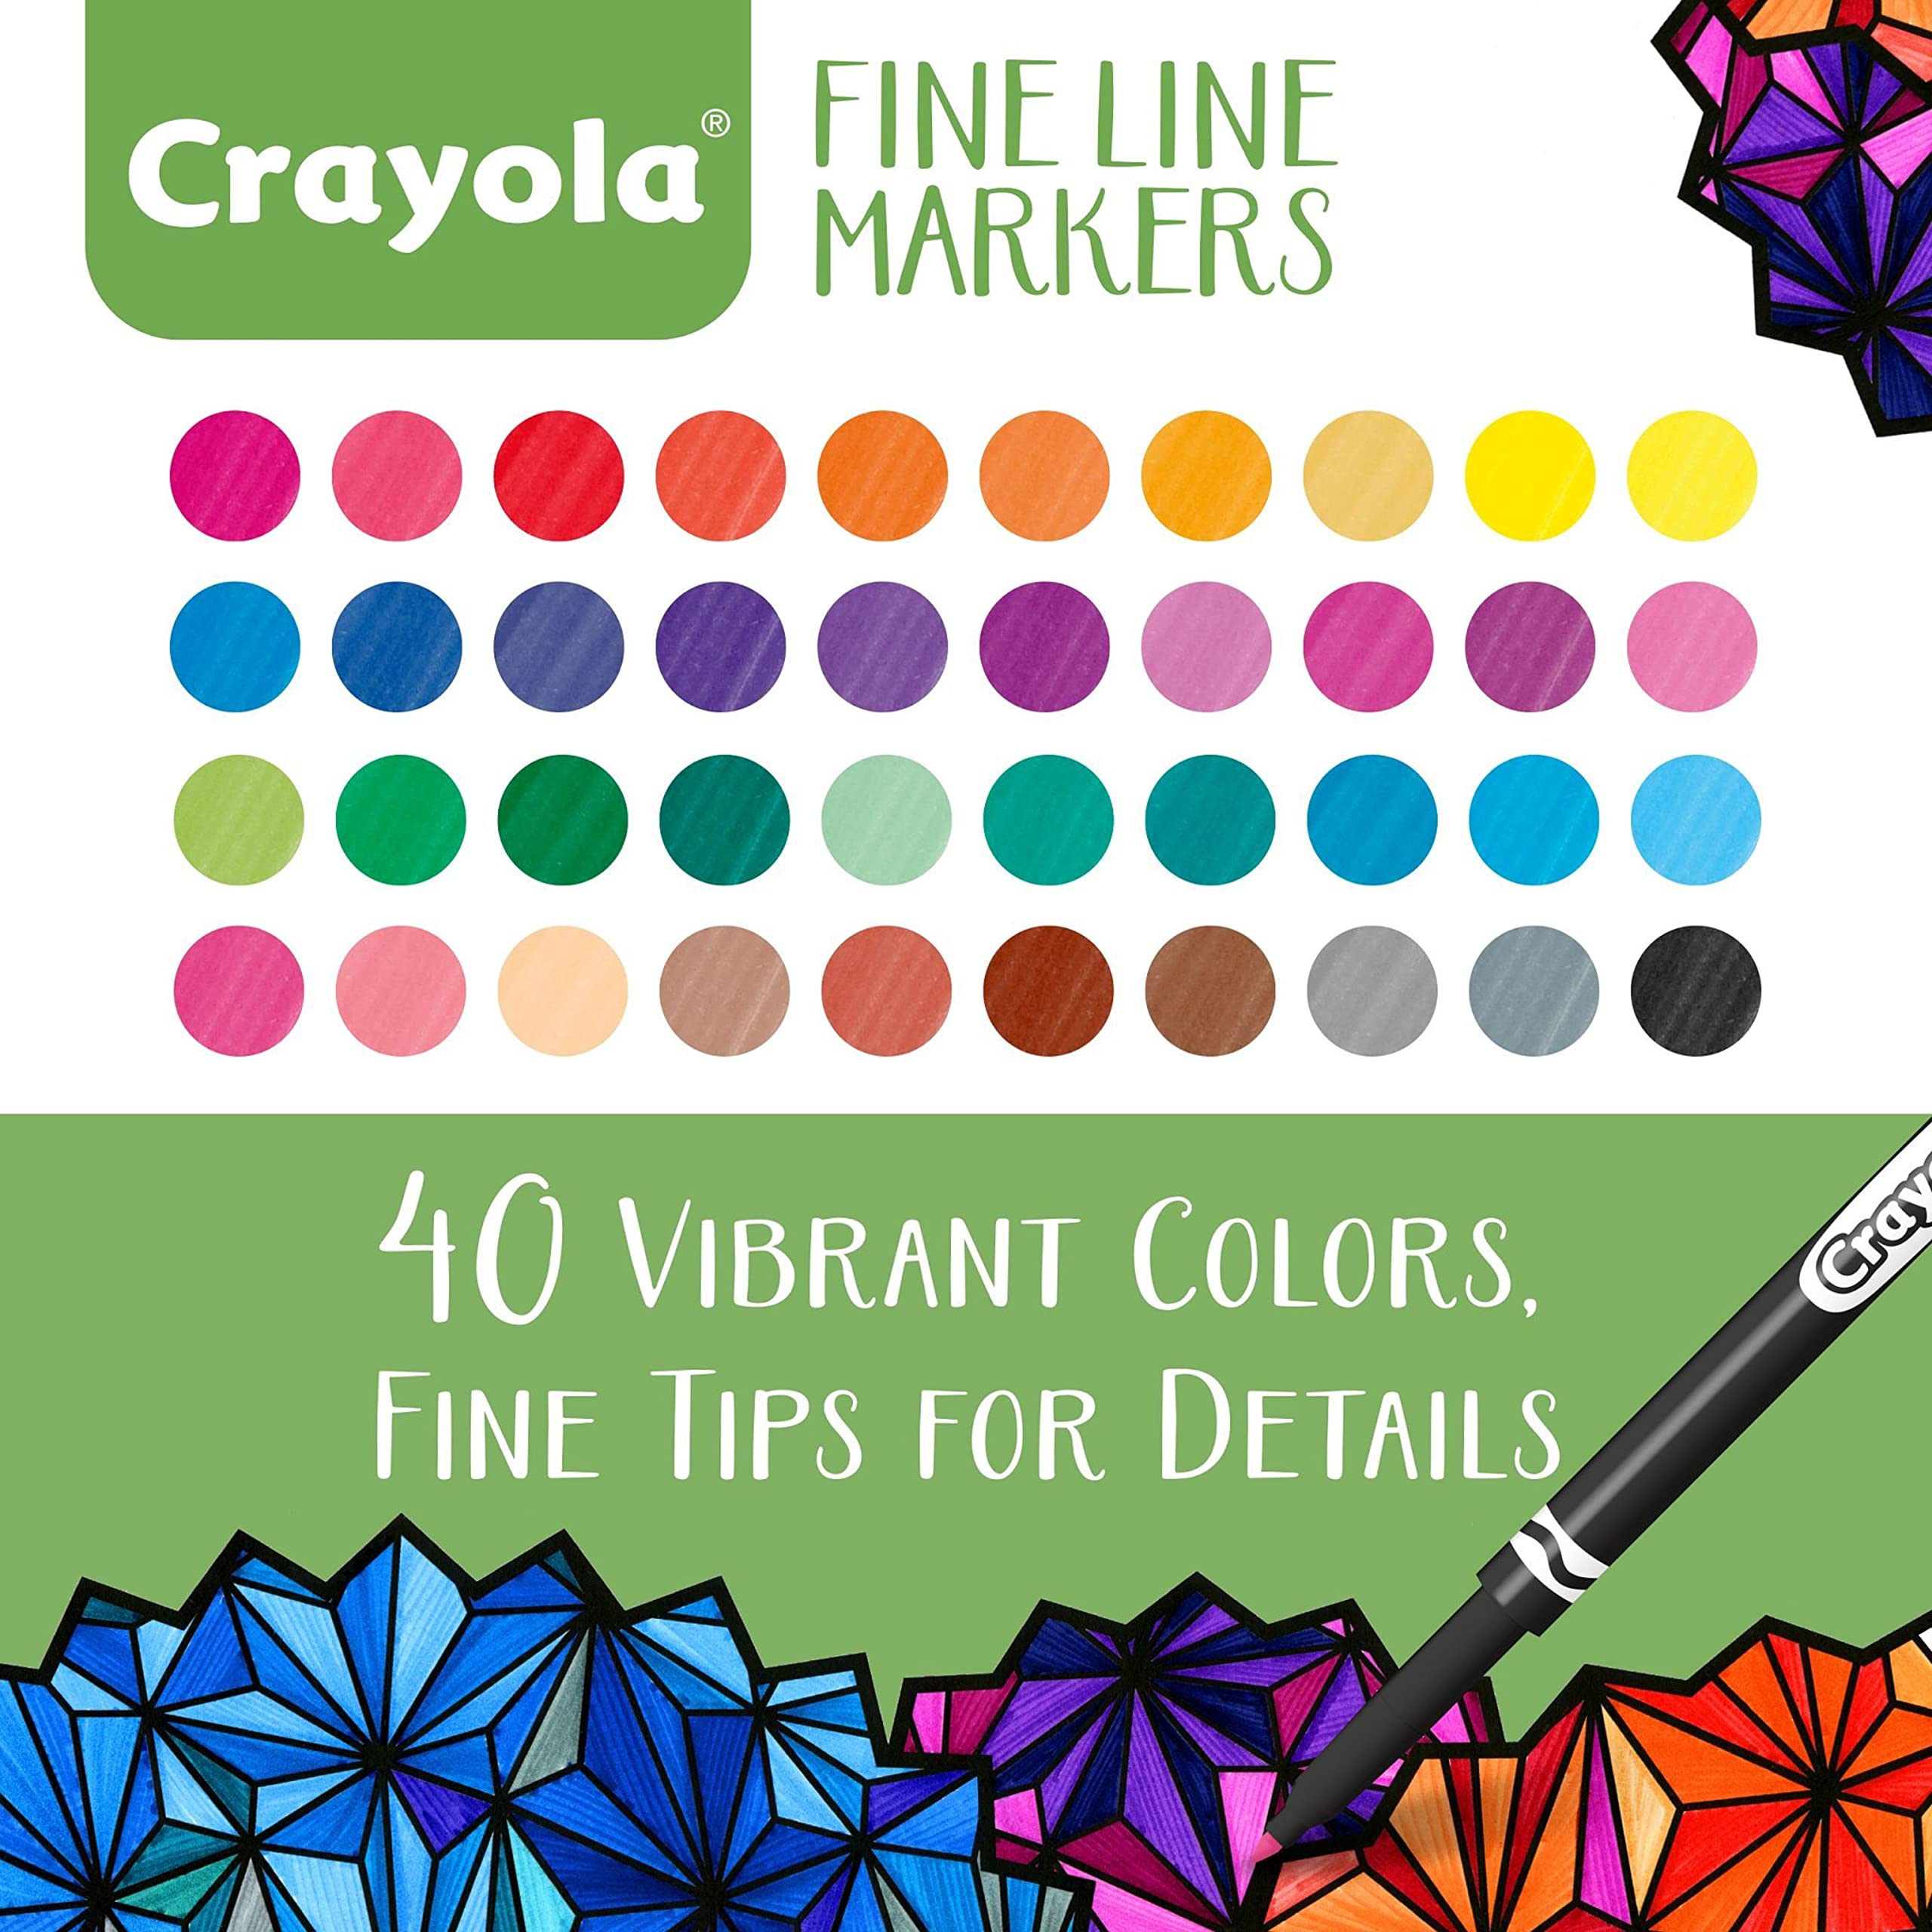 Crayola Fine Line Markers For Adults 40 Count, Fine Line Markers for Adult Coloring Books, Back to School Markers [Amazon Exclusive]